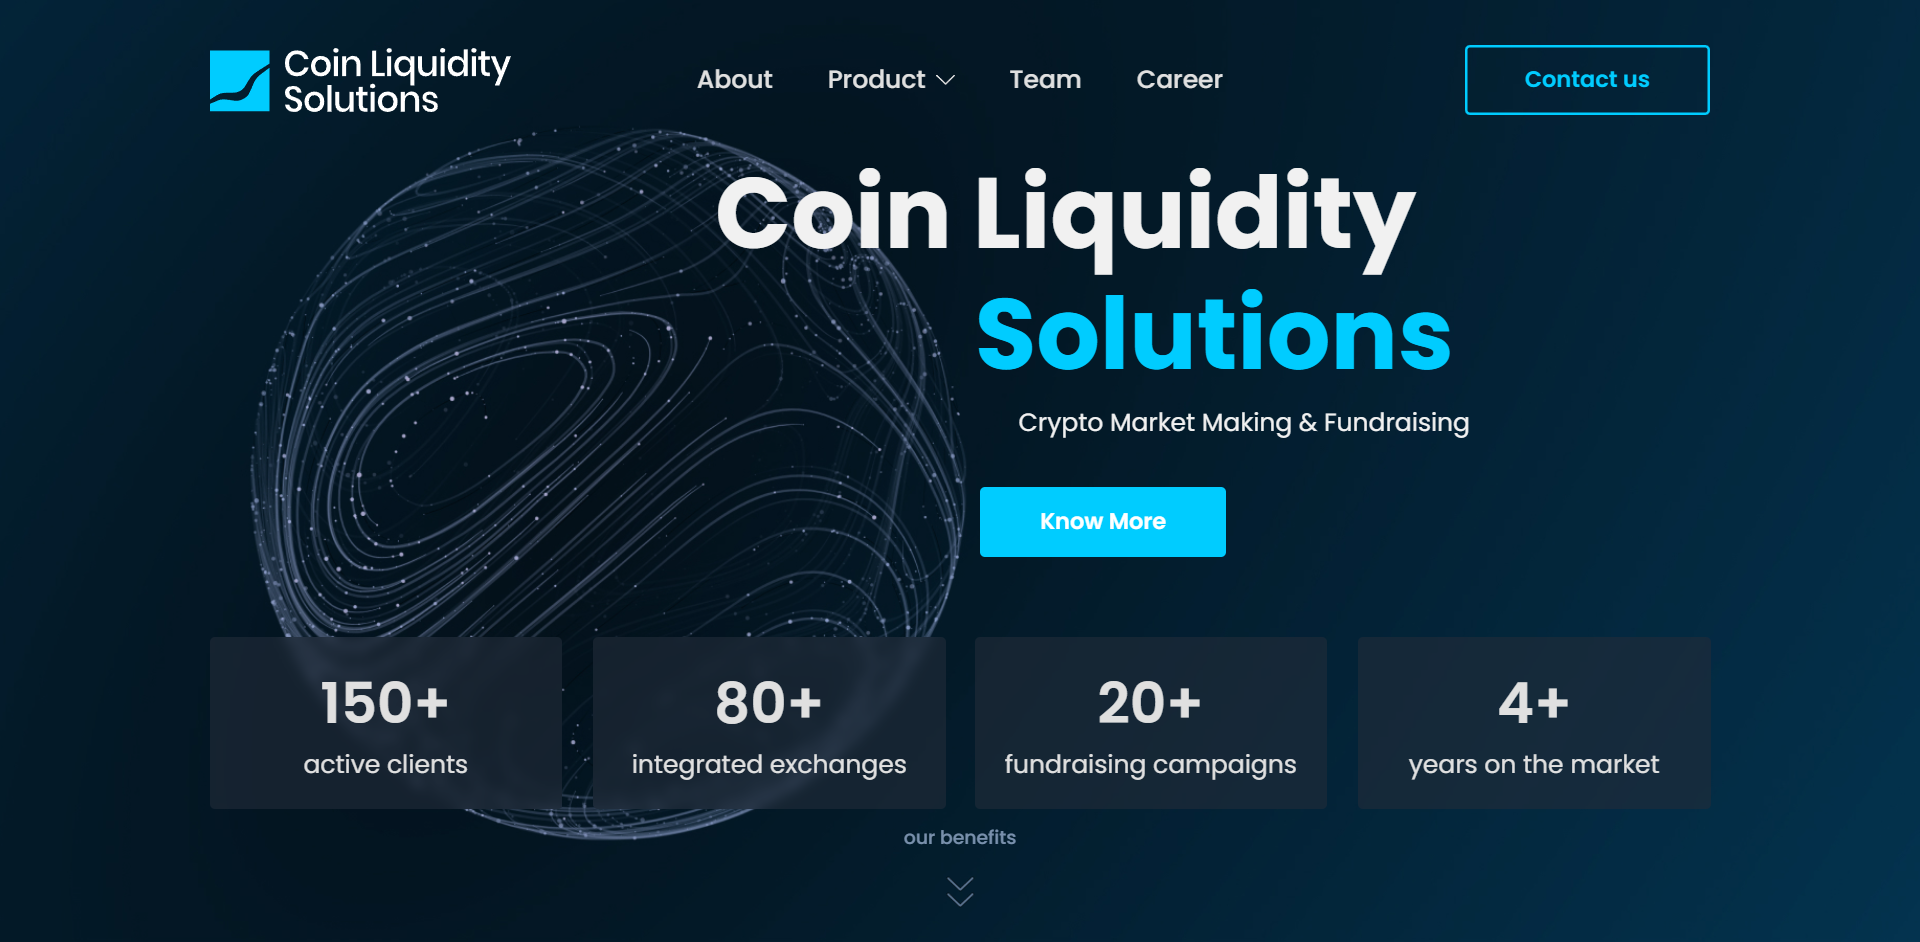 Coin Liquidity Solutions release sophisticated marketing and market-making campaigns